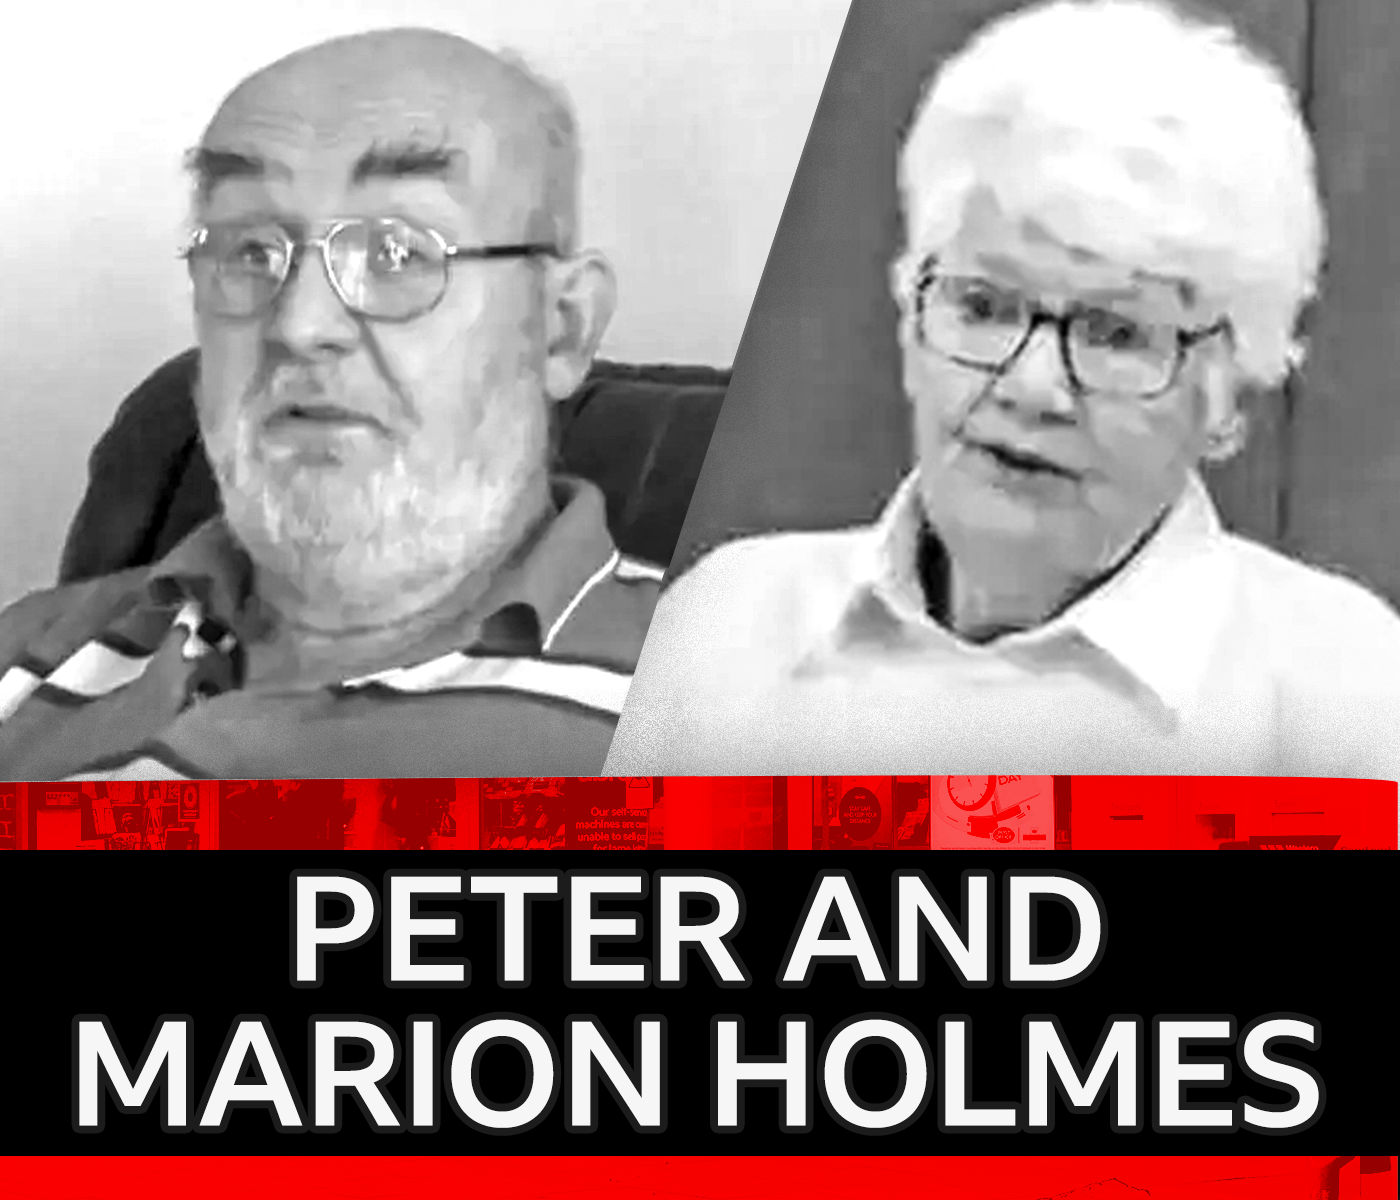 Peter and Marion Holmes placed on photograph next to each other